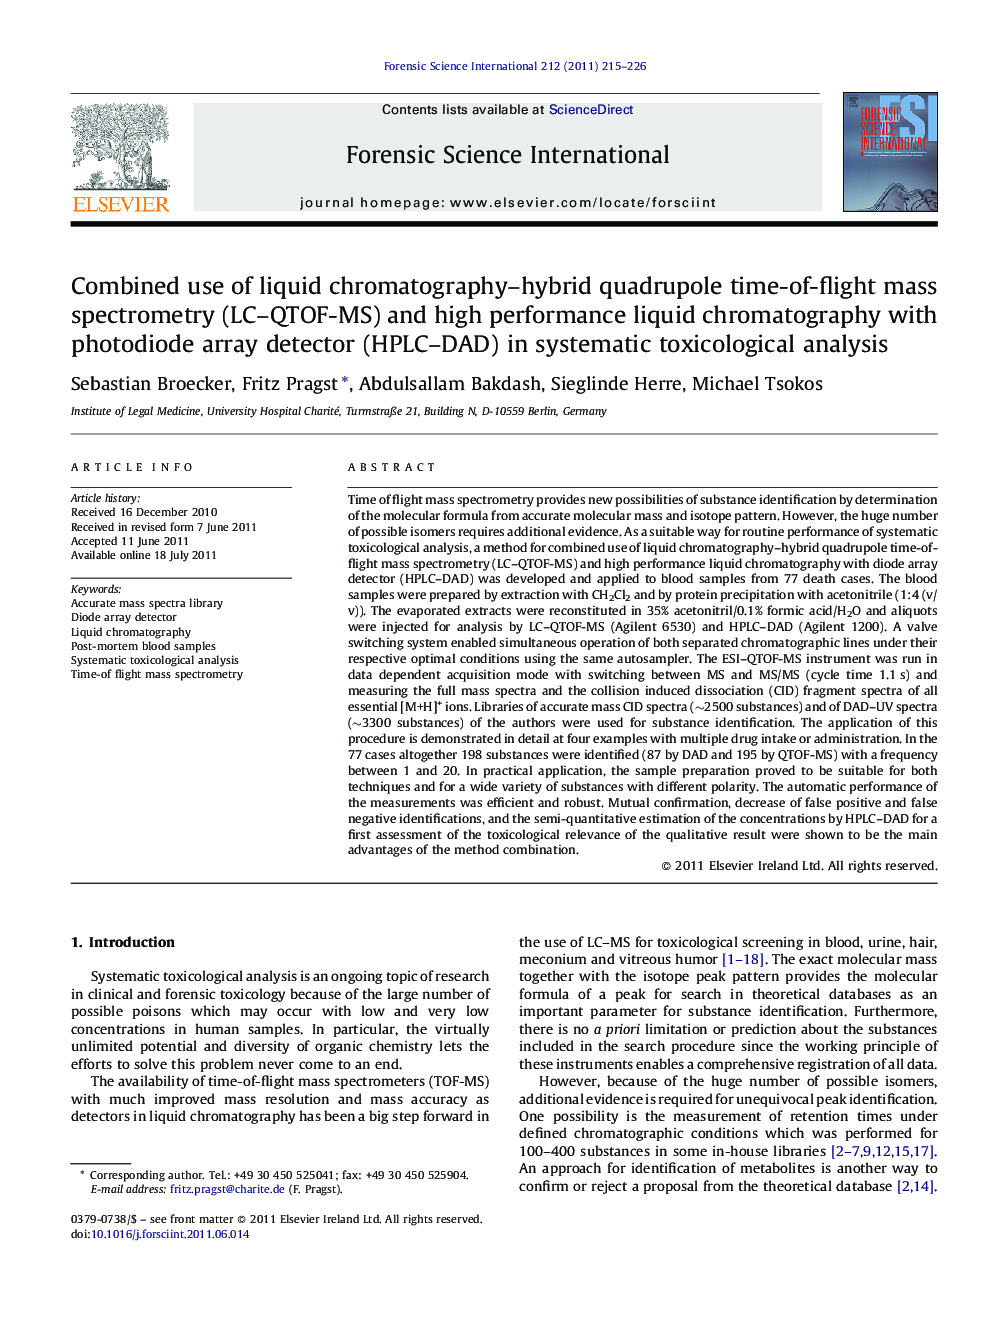 Combined use of liquid chromatography–hybrid quadrupole time-of-flight mass spectrometry (LC–QTOF-MS) and high performance liquid chromatography with photodiode array detector (HPLC–DAD) in systematic toxicological analysis